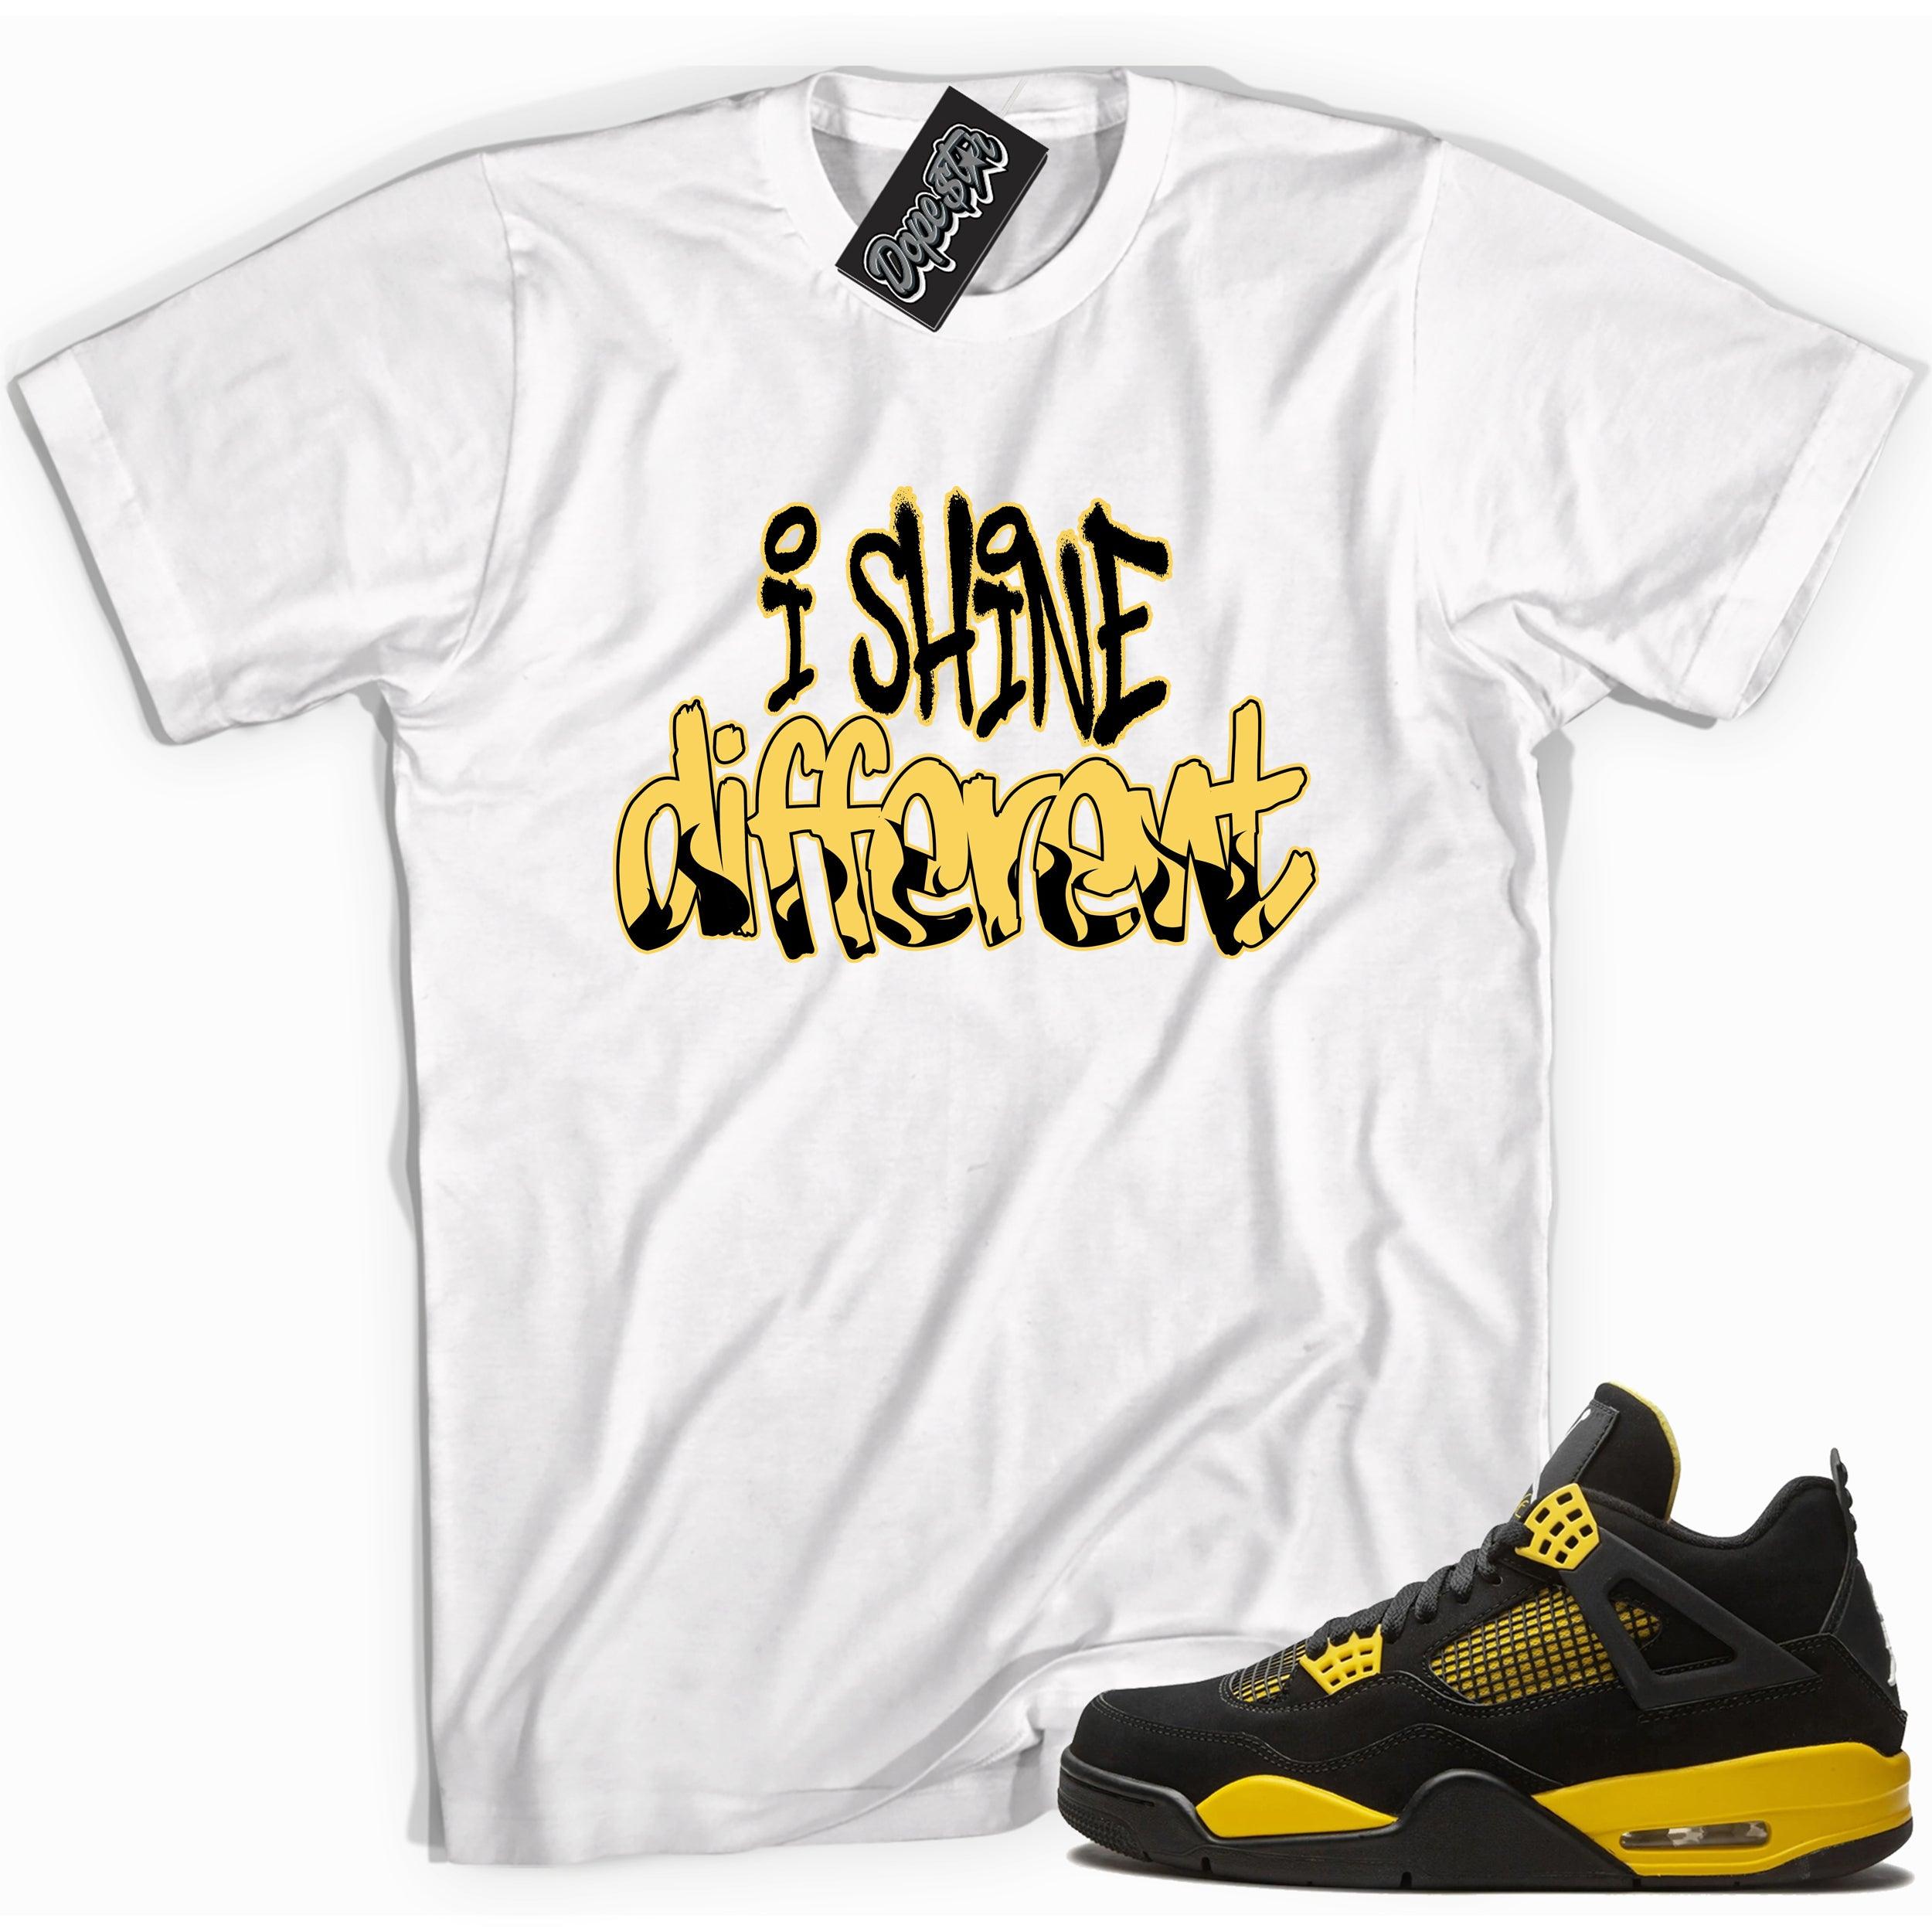 Cool white graphic tee with 'i shine different' print, that perfectly matches Air Jordan 4 Thunder sneakers